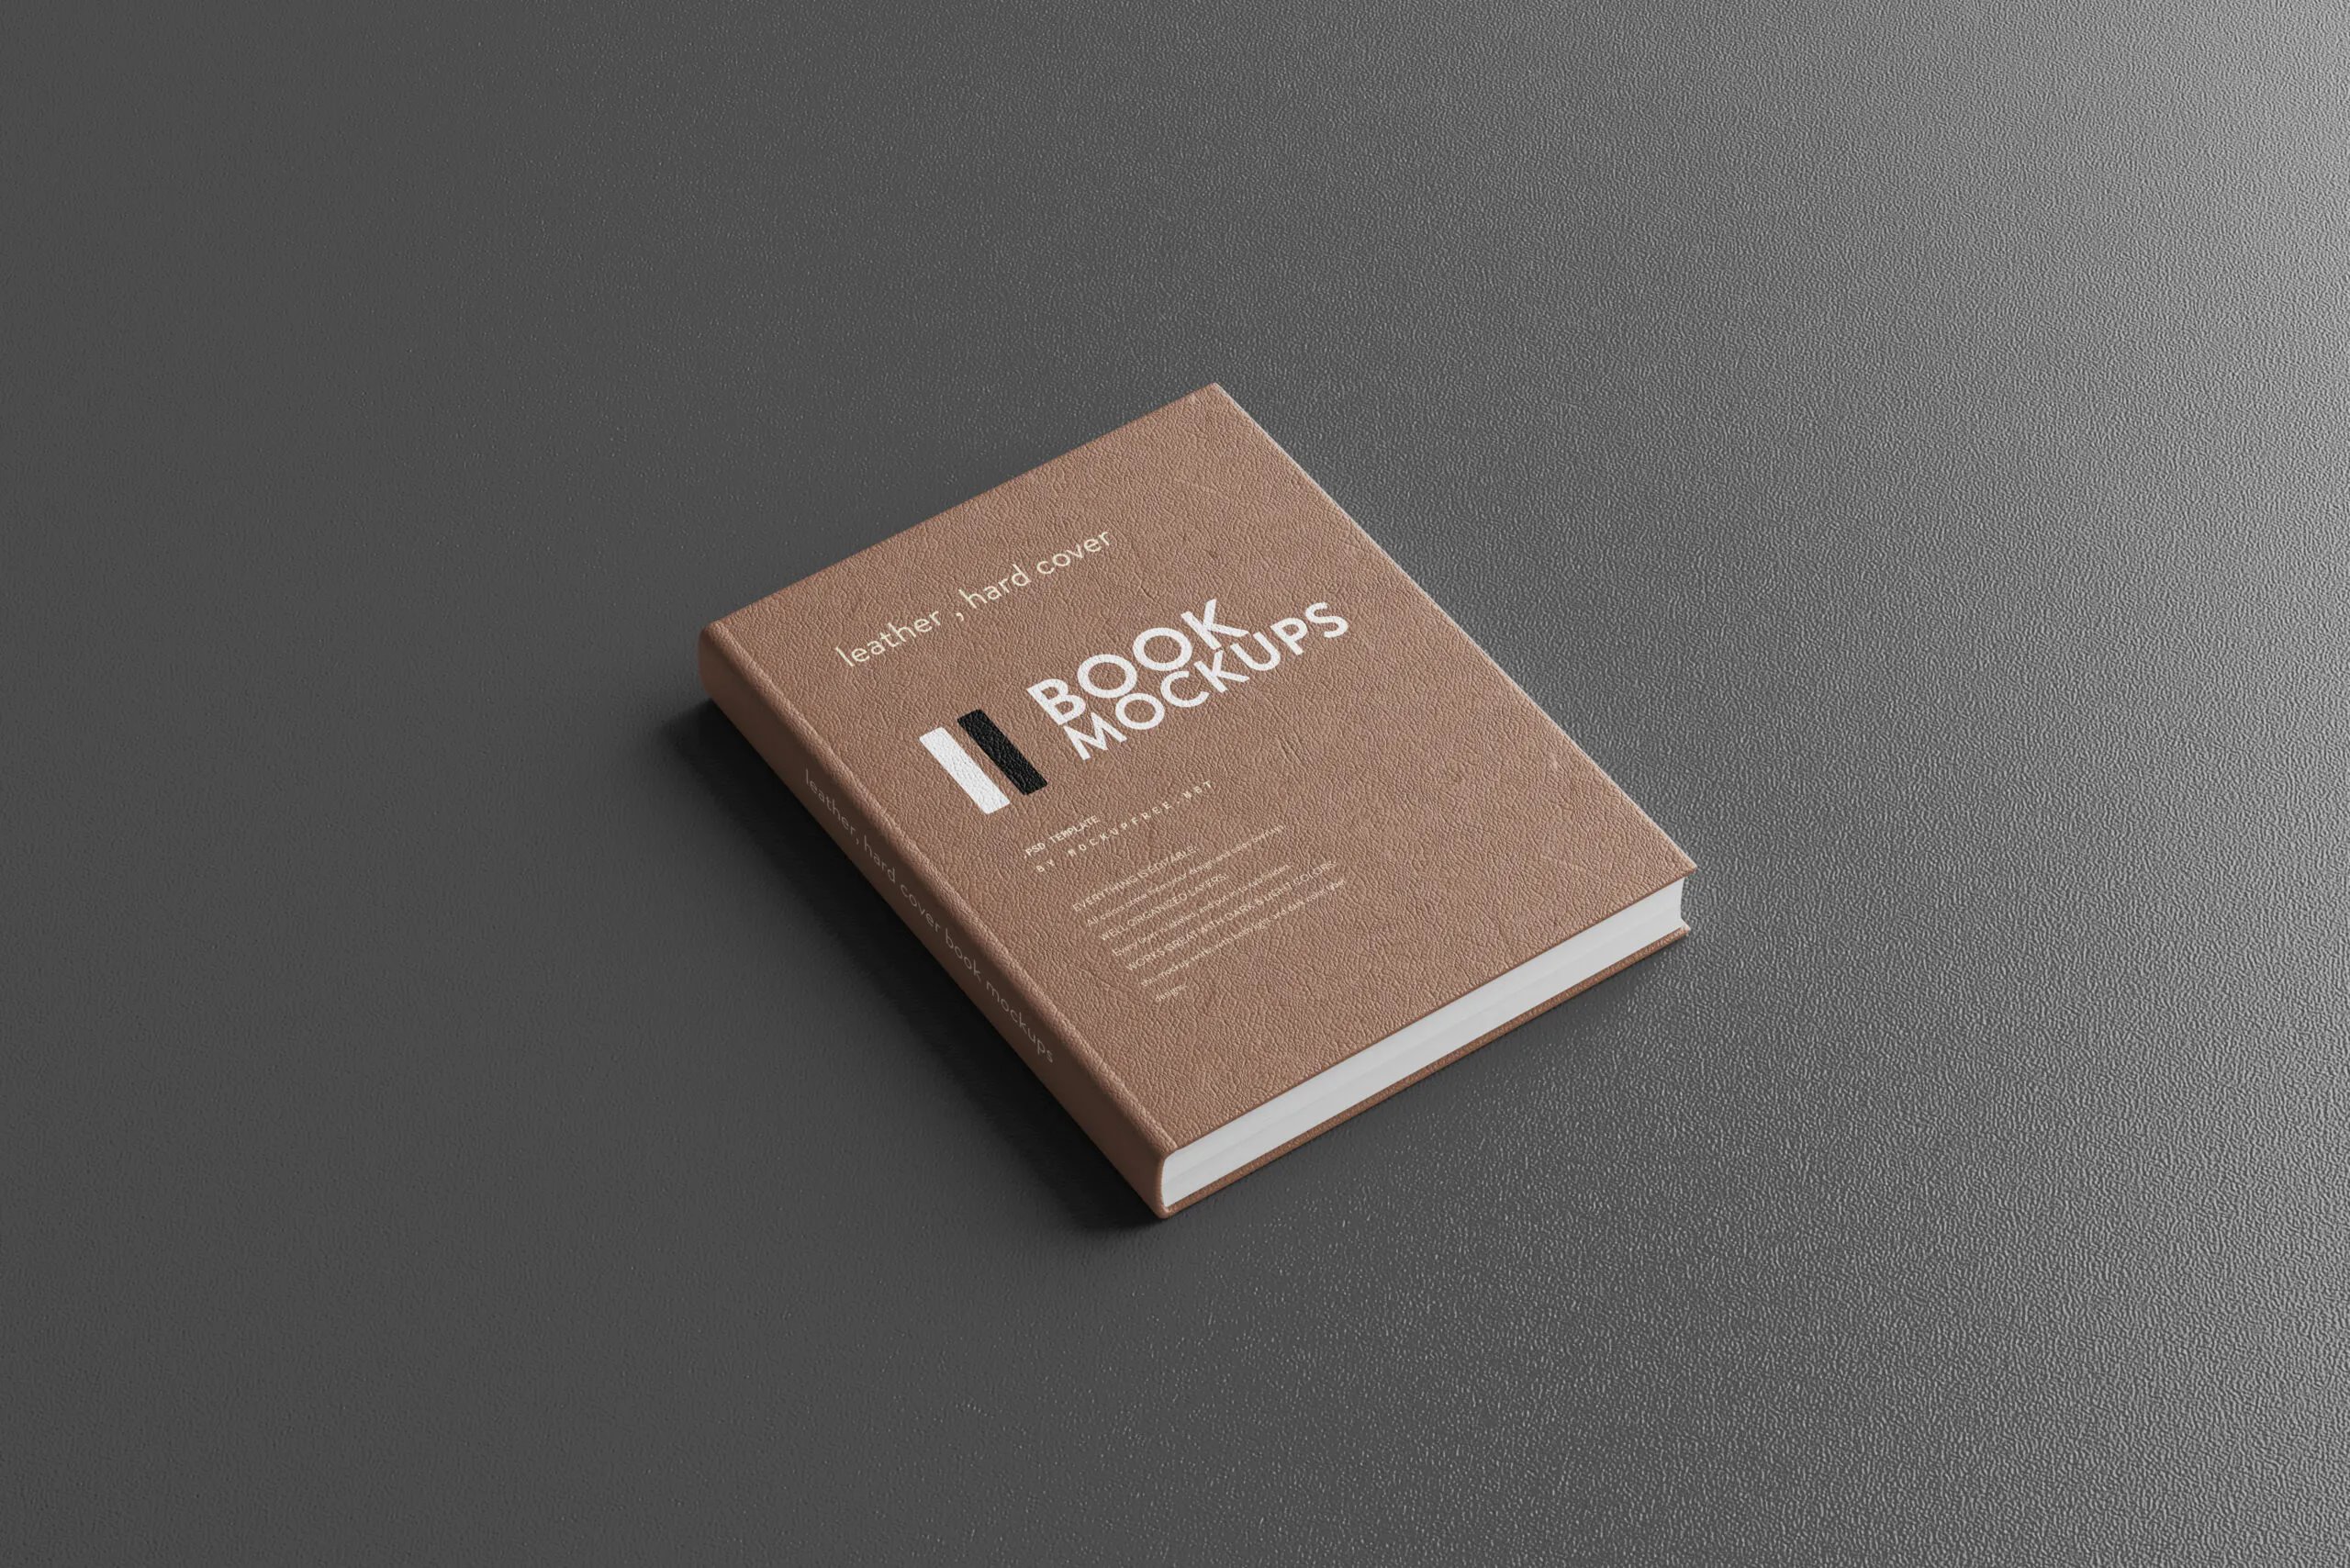 5 Mockups of Leather Hard Cover Books in Different Sights FREE PSD